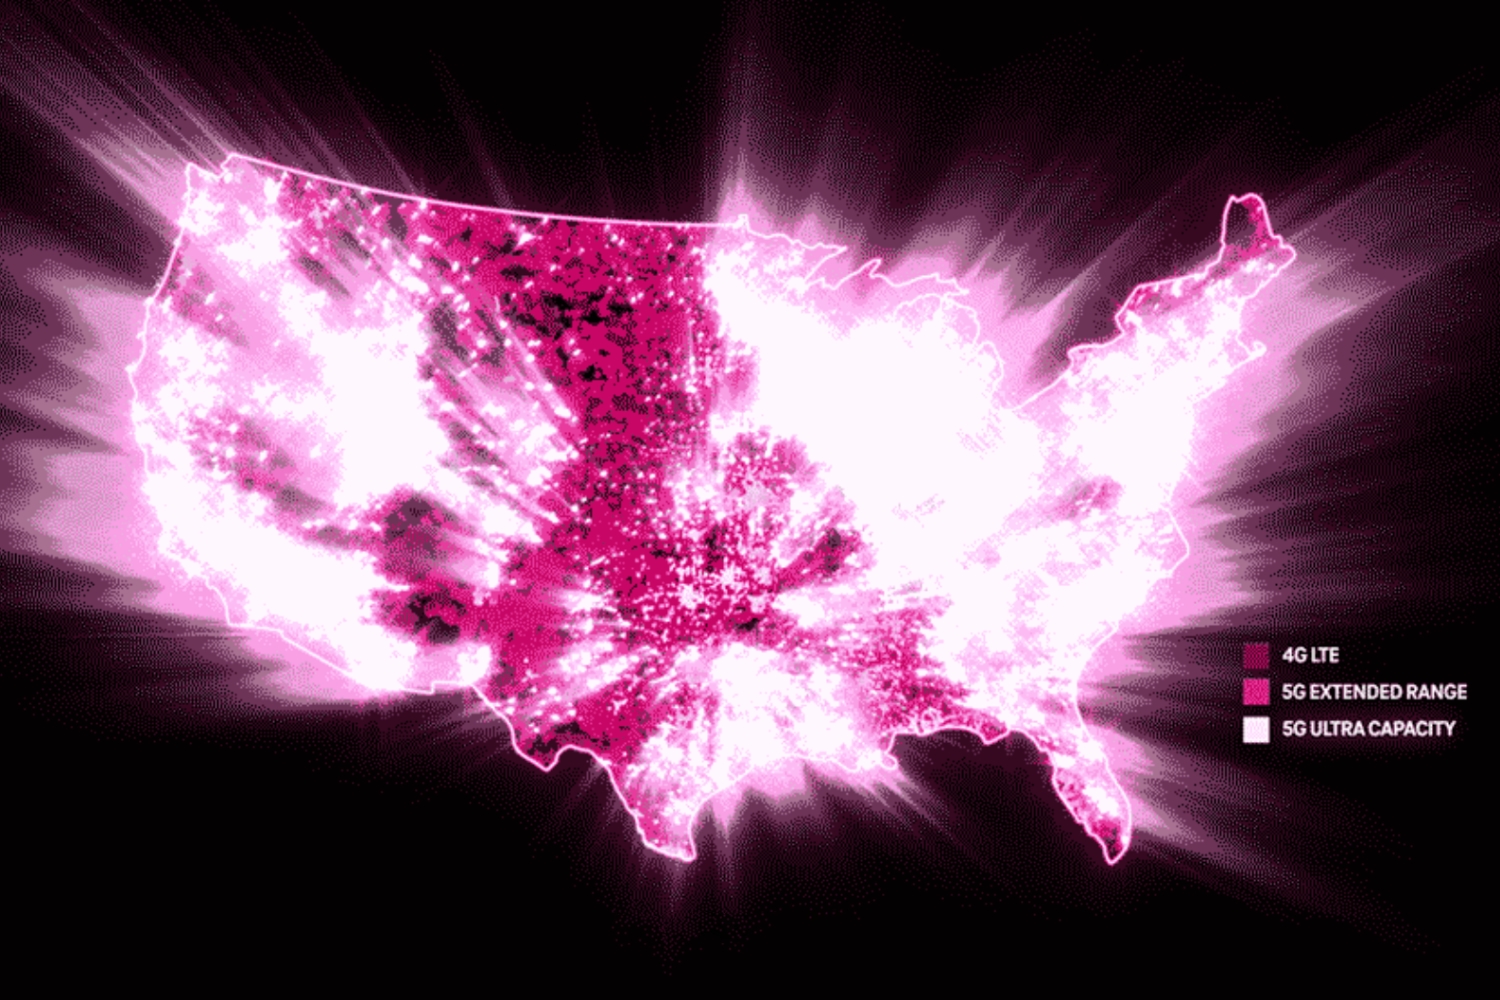 T-Mobile 5G Ultra Capacity Network Expansion